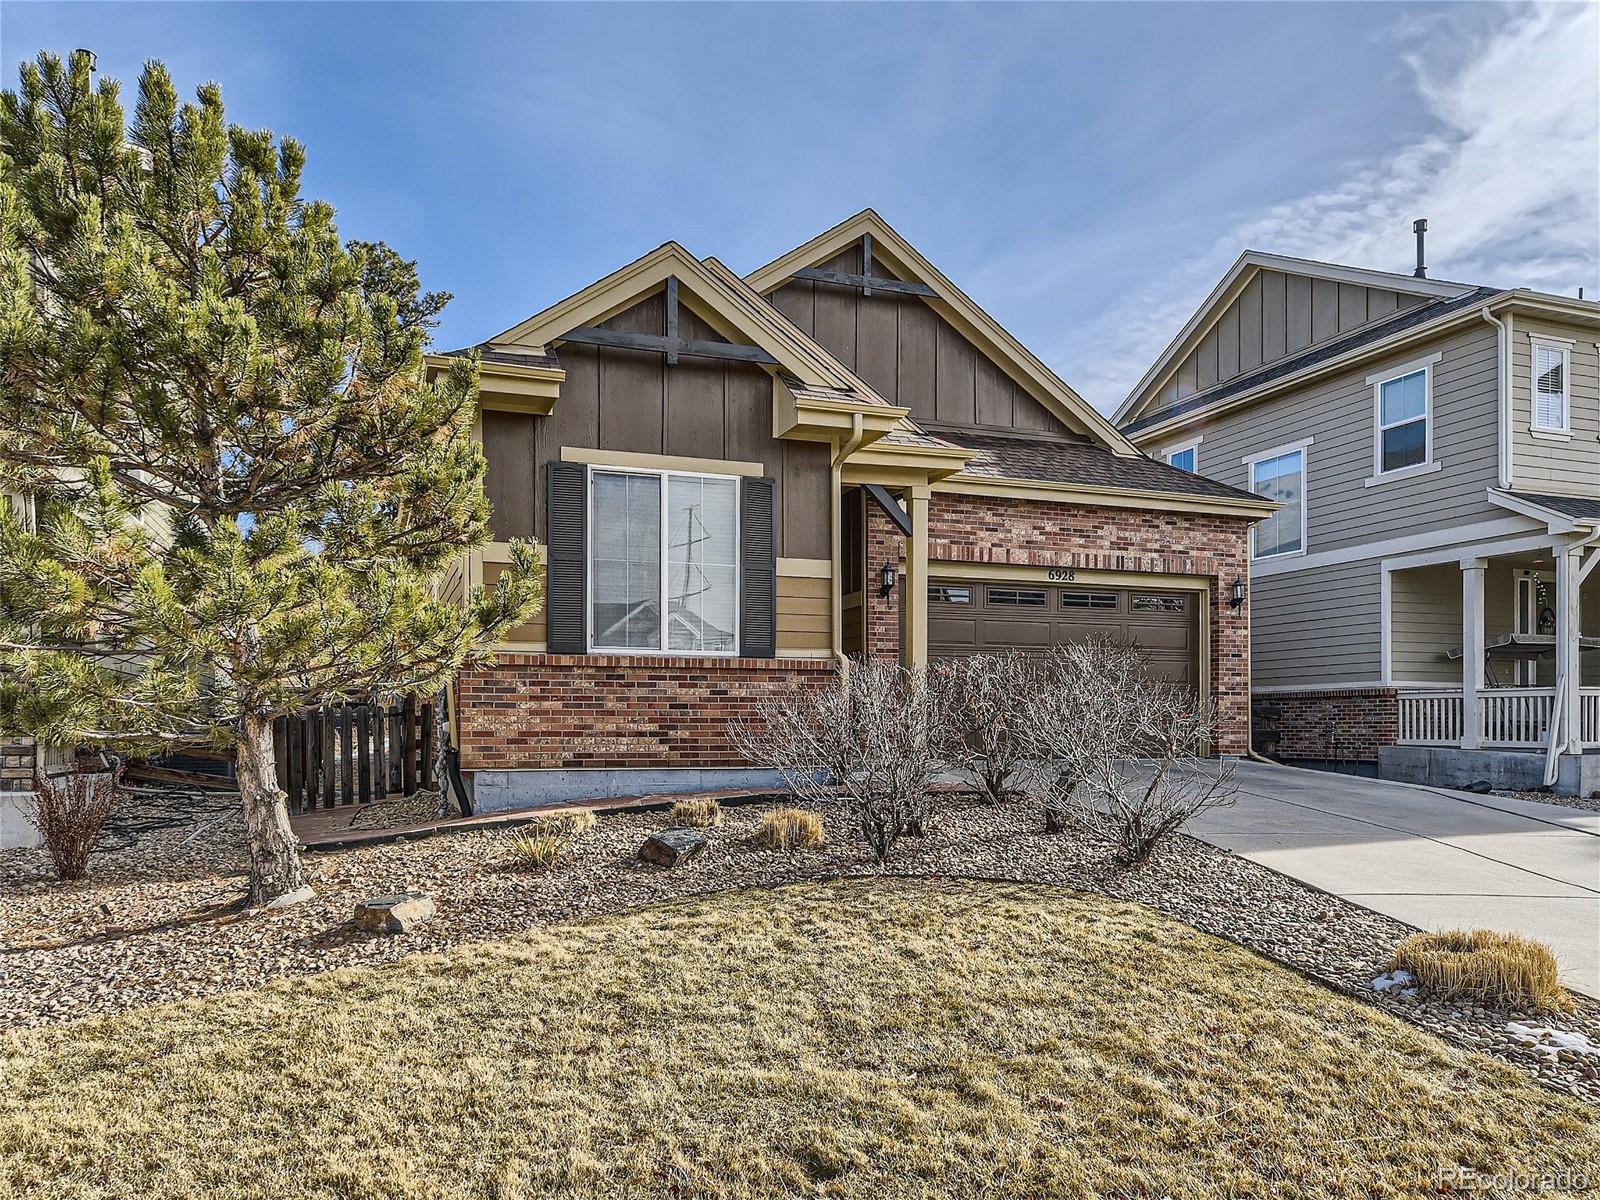 6928 s elk court, Aurora sold home. Closed on 2024-04-15 for $639,900.